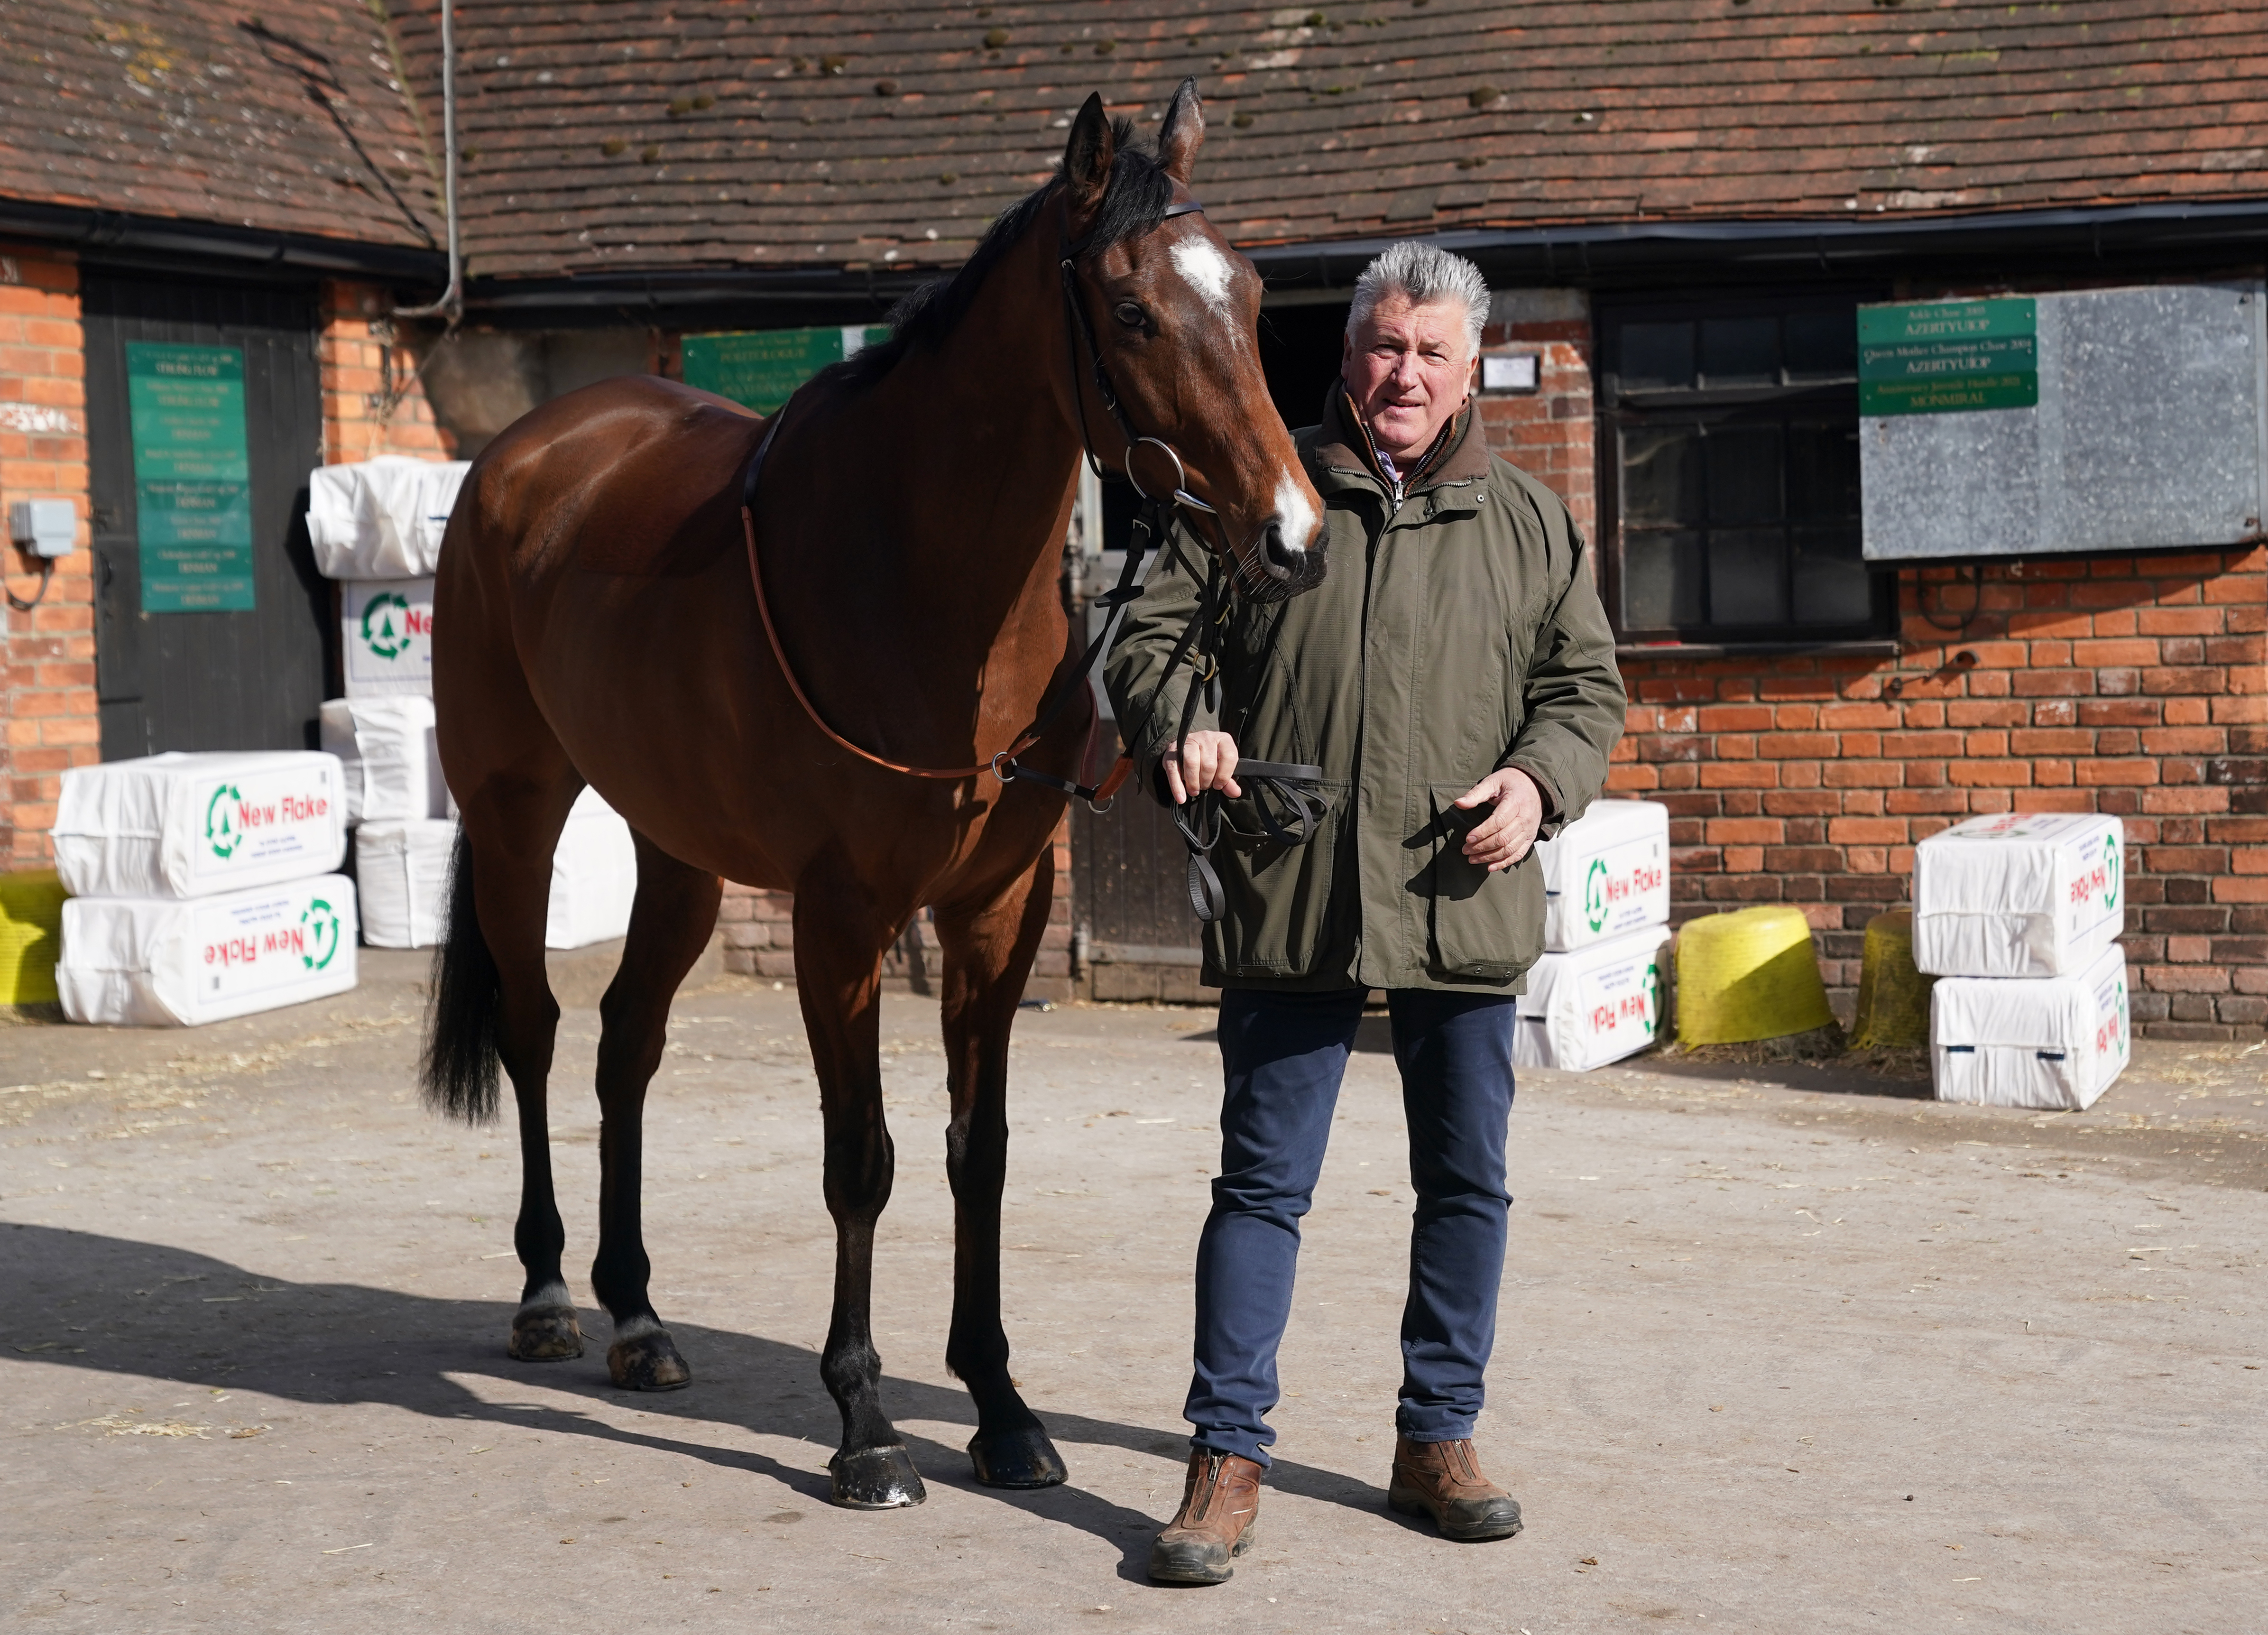 Hermes Allen is a chaser for the future, Paul Nicholls insists